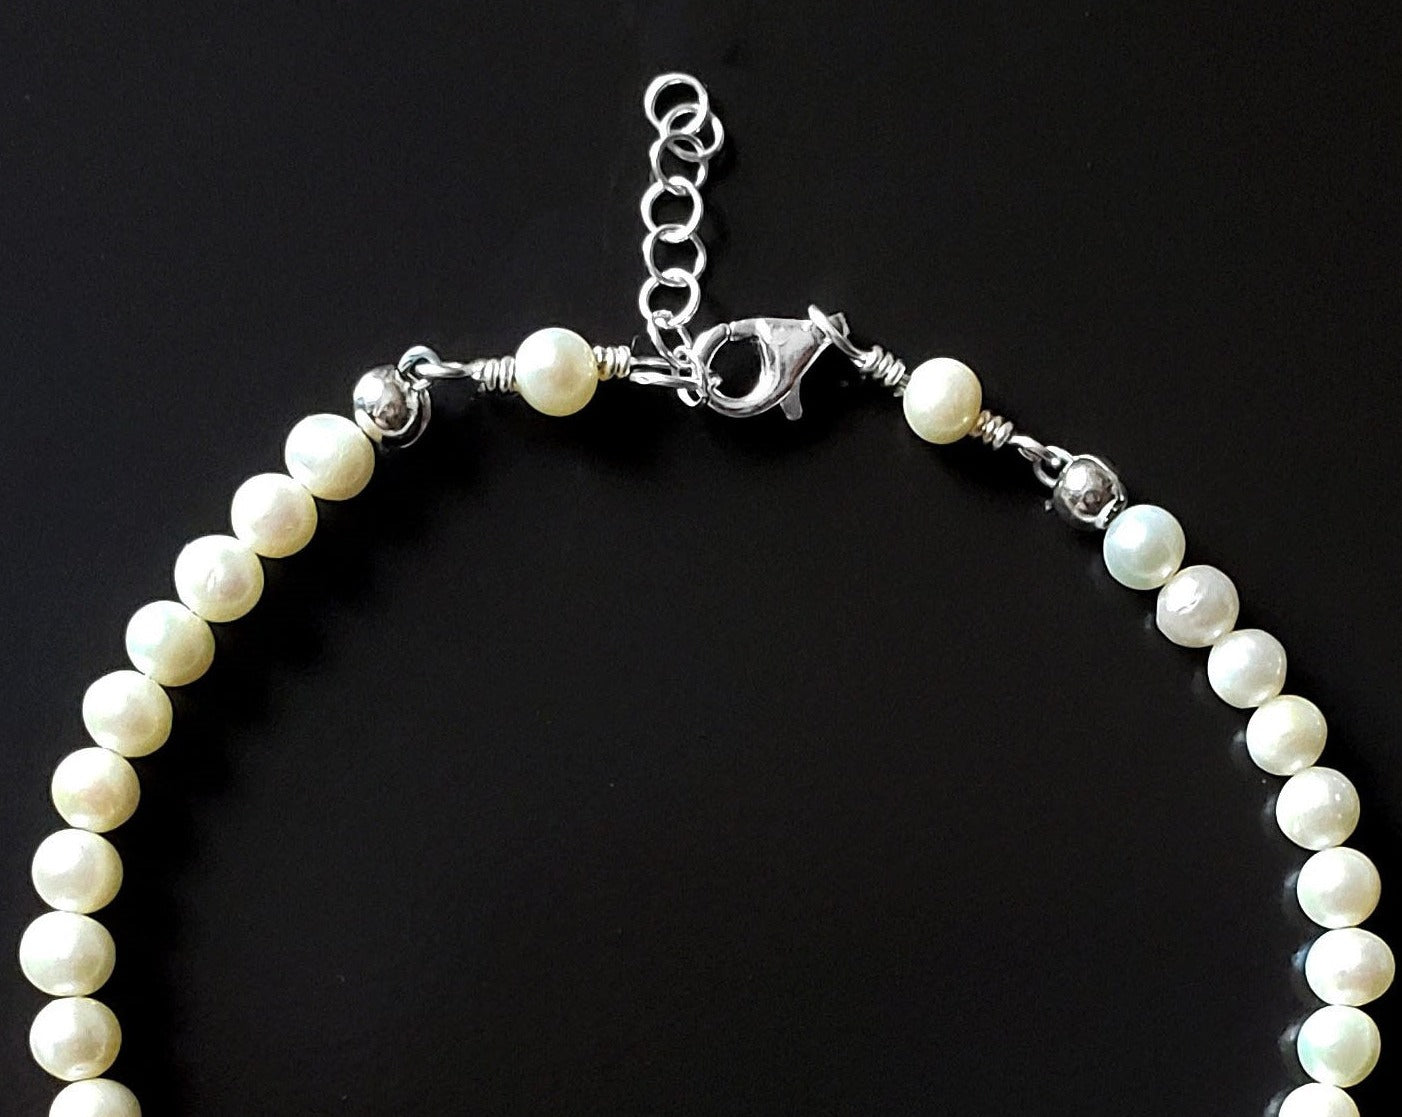 Genuine Pearl Anklet-Ankle Bracelet-Handcrafted-High Quality White Freshwater Cultured Pearls-925 Sterling Silver